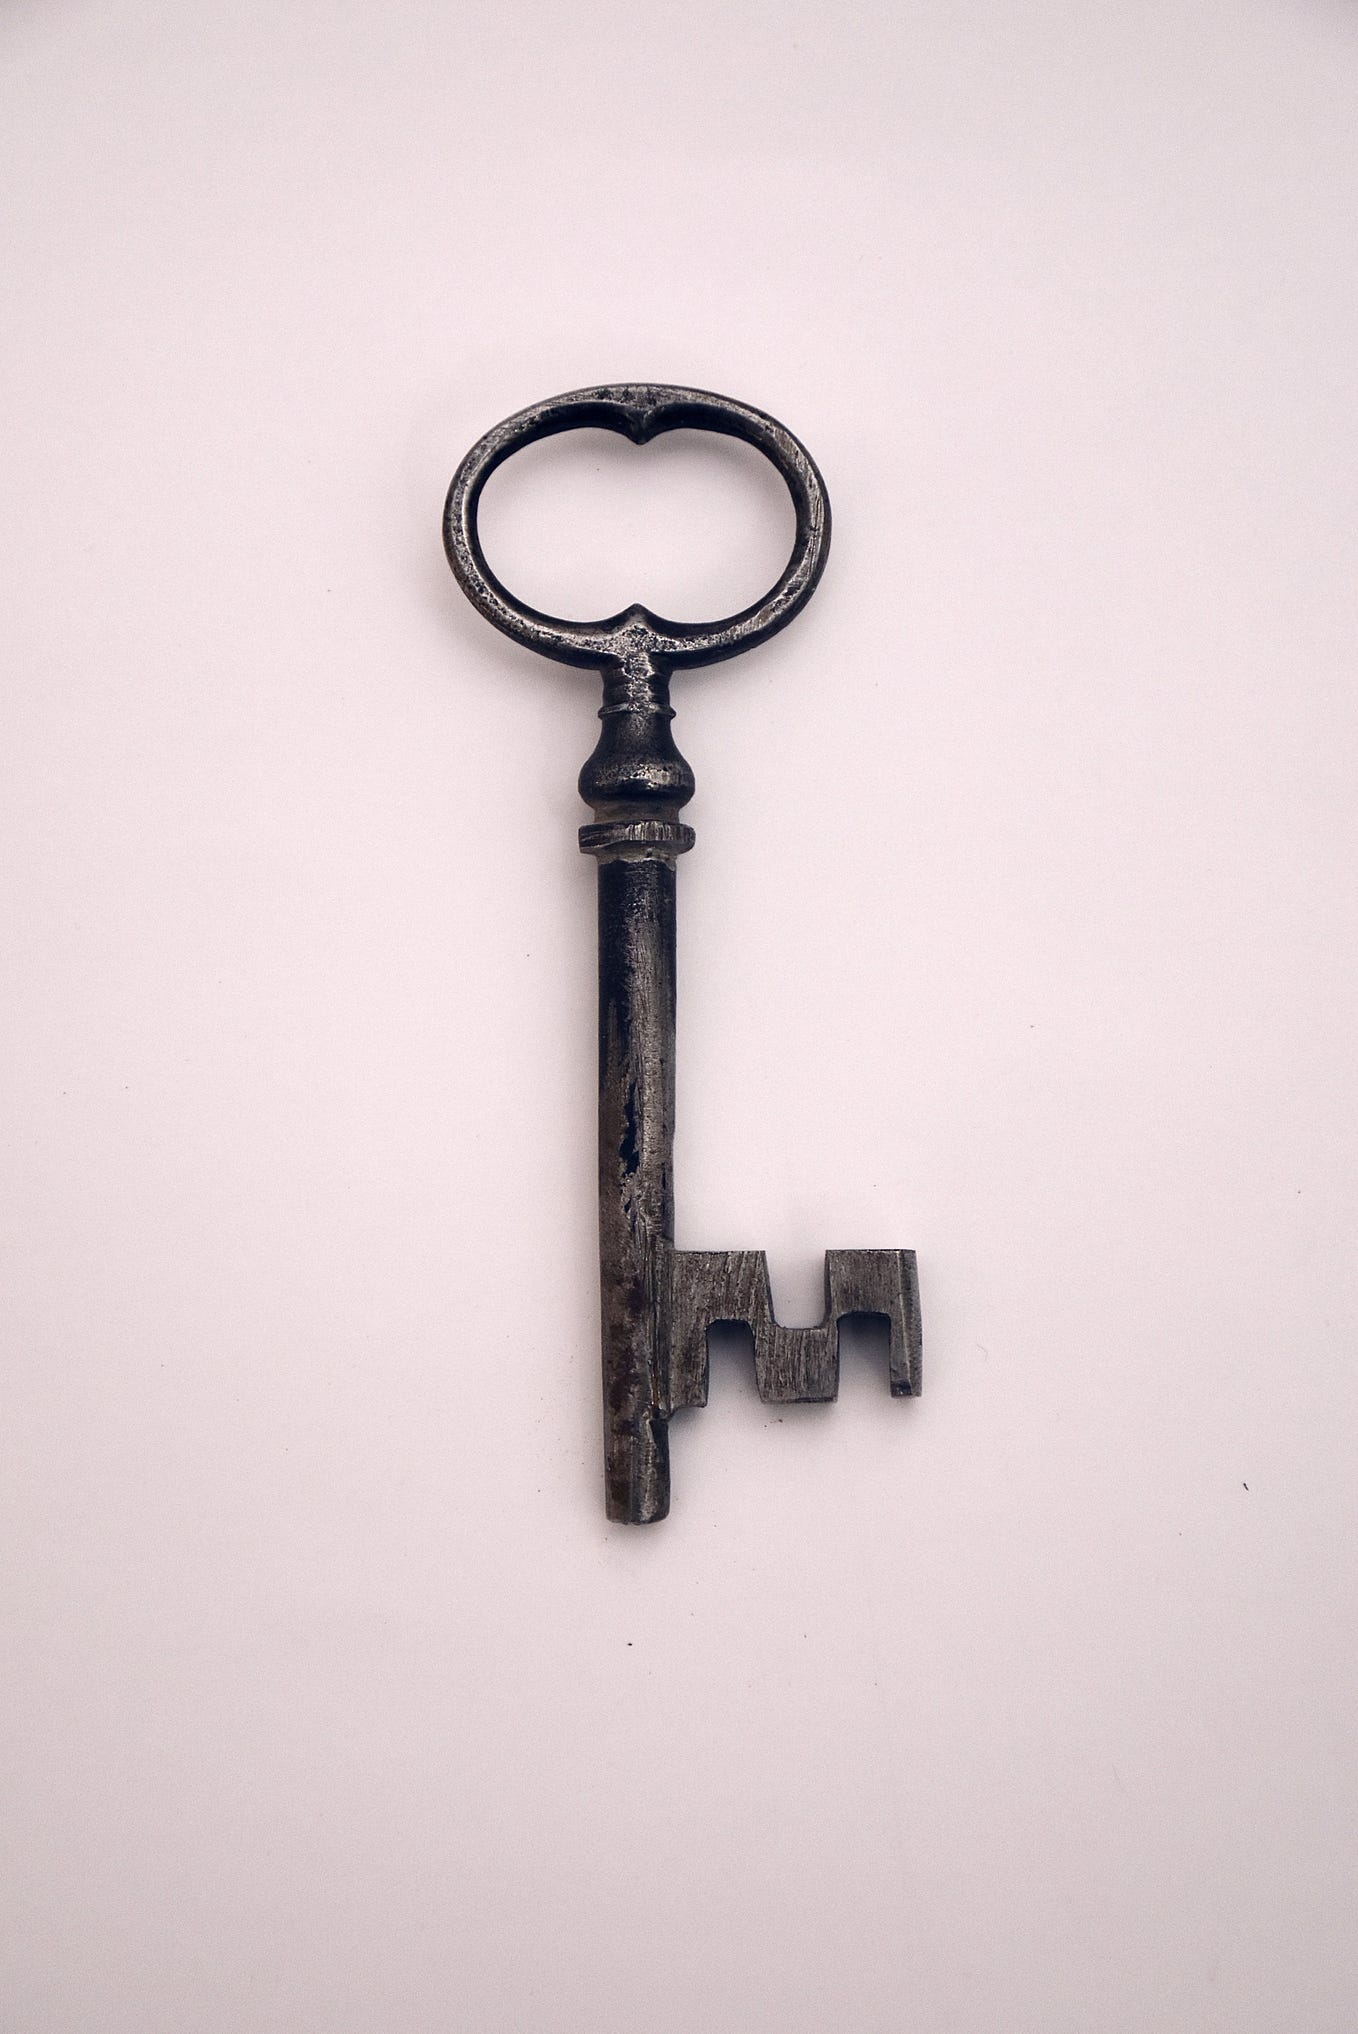 A key on the pink background